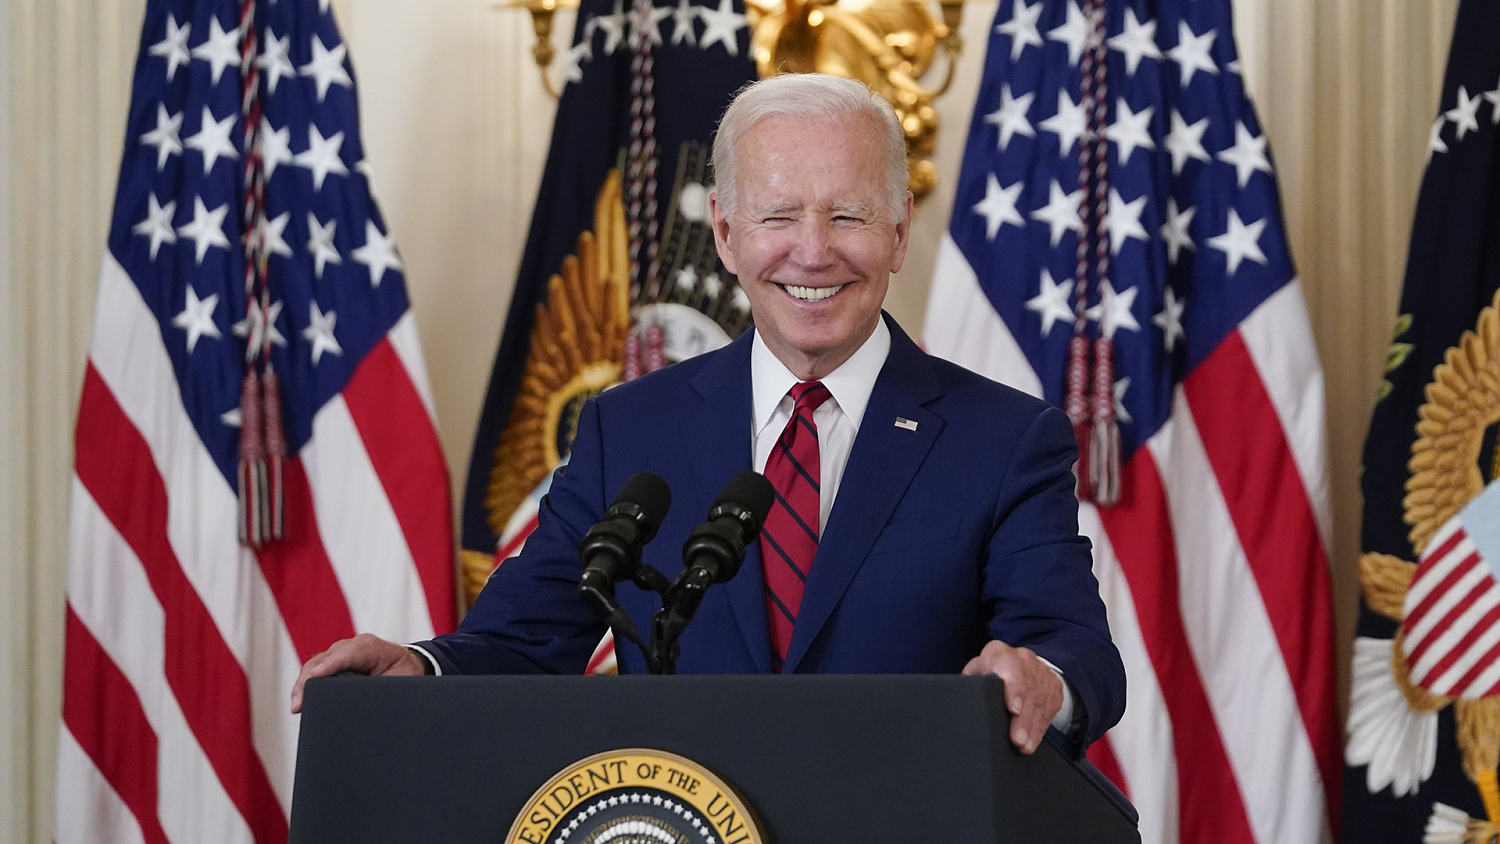 Biden delivers remarks at the Stonewall National Monument during Pride Month